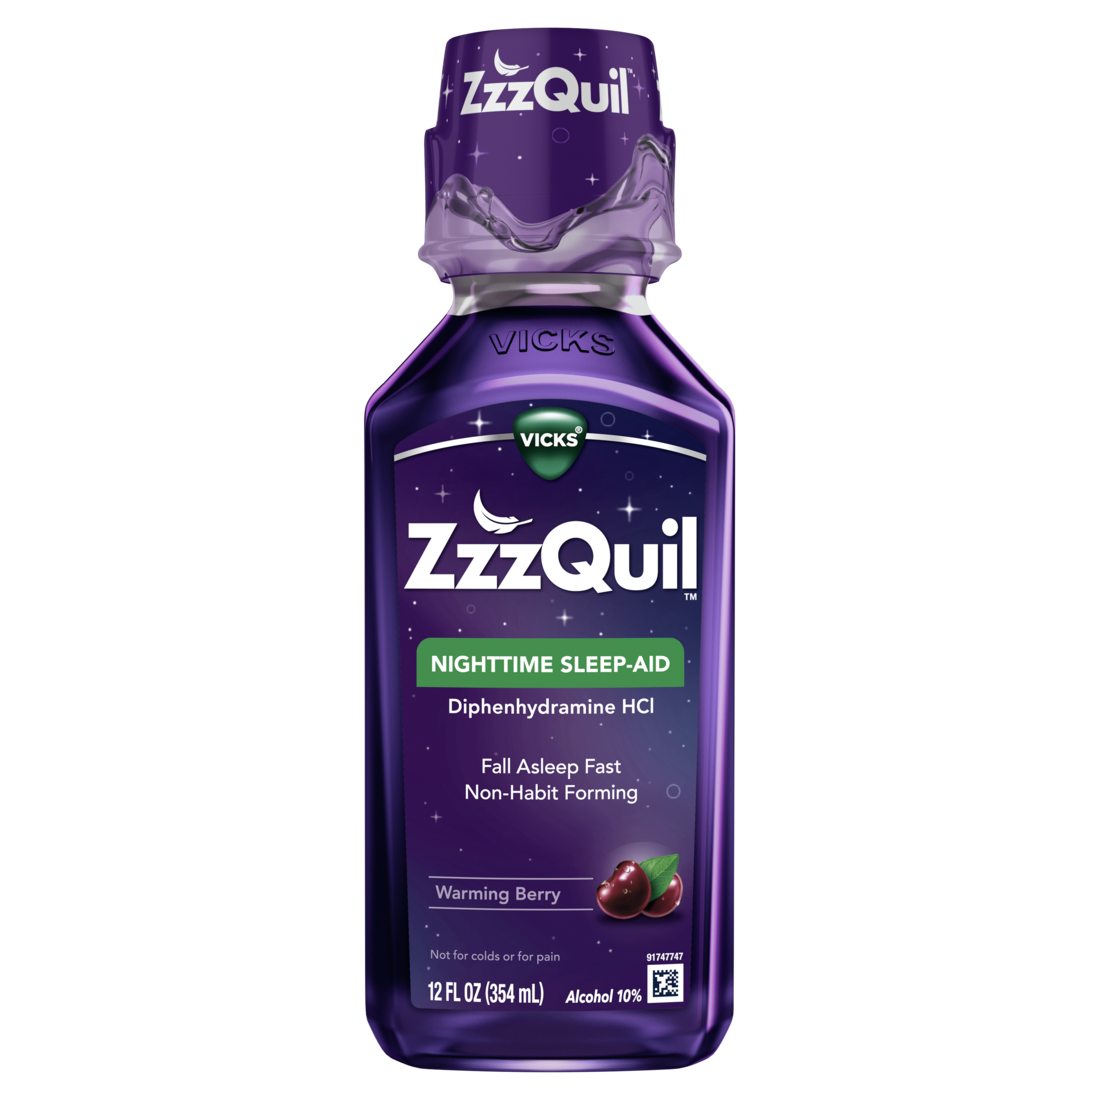 Is Zzzquil Addictive?